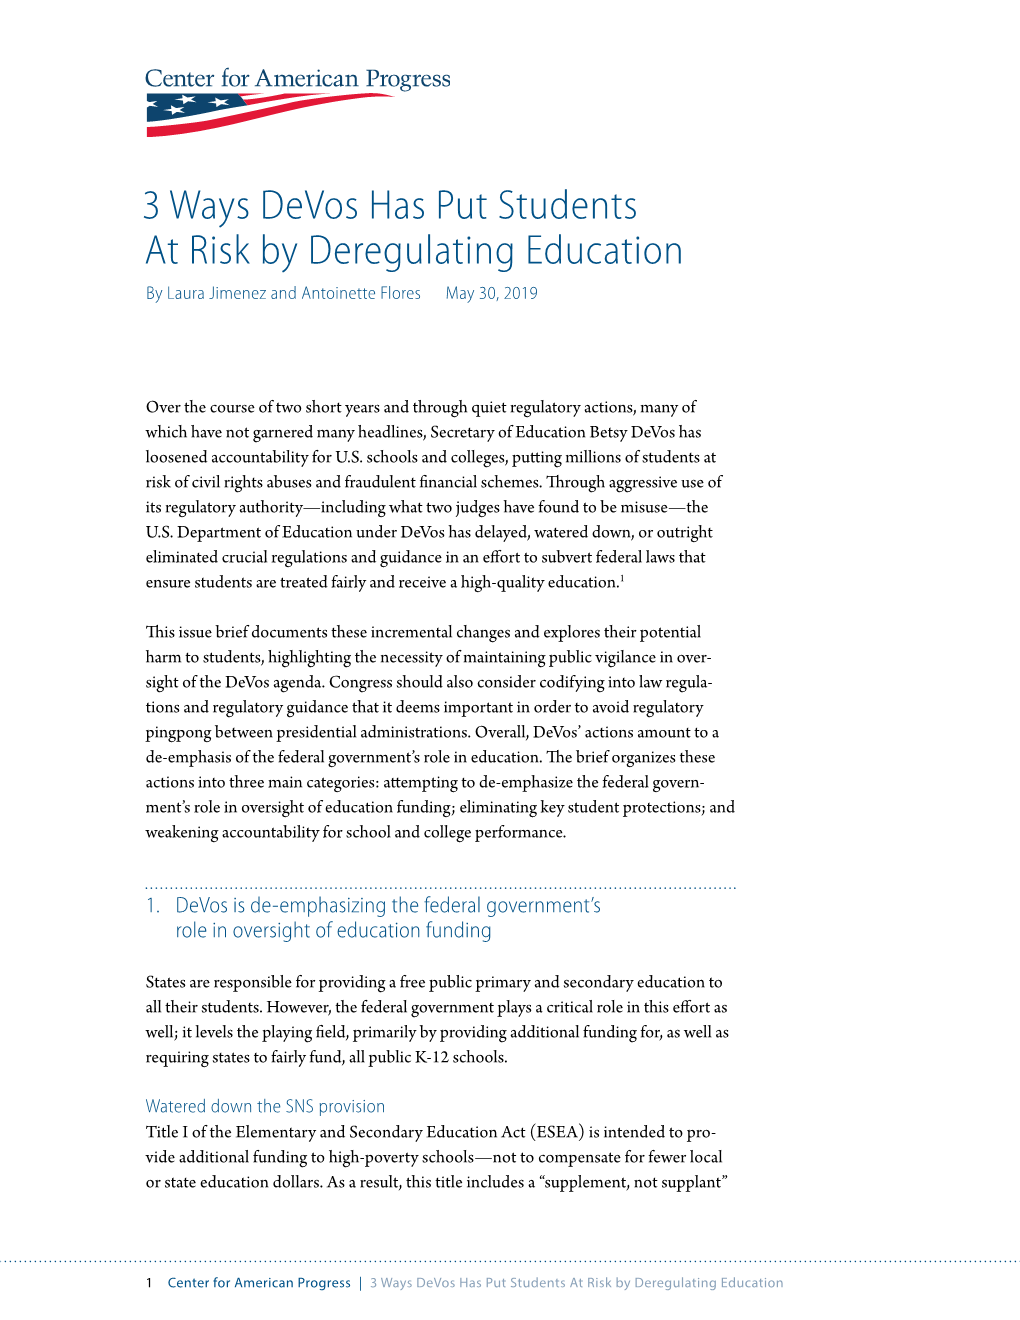 3 Ways Devos Has Put Students at Risk by Deregulating Education by Laura Jimenez and Antoinette Flores May 30, 2019